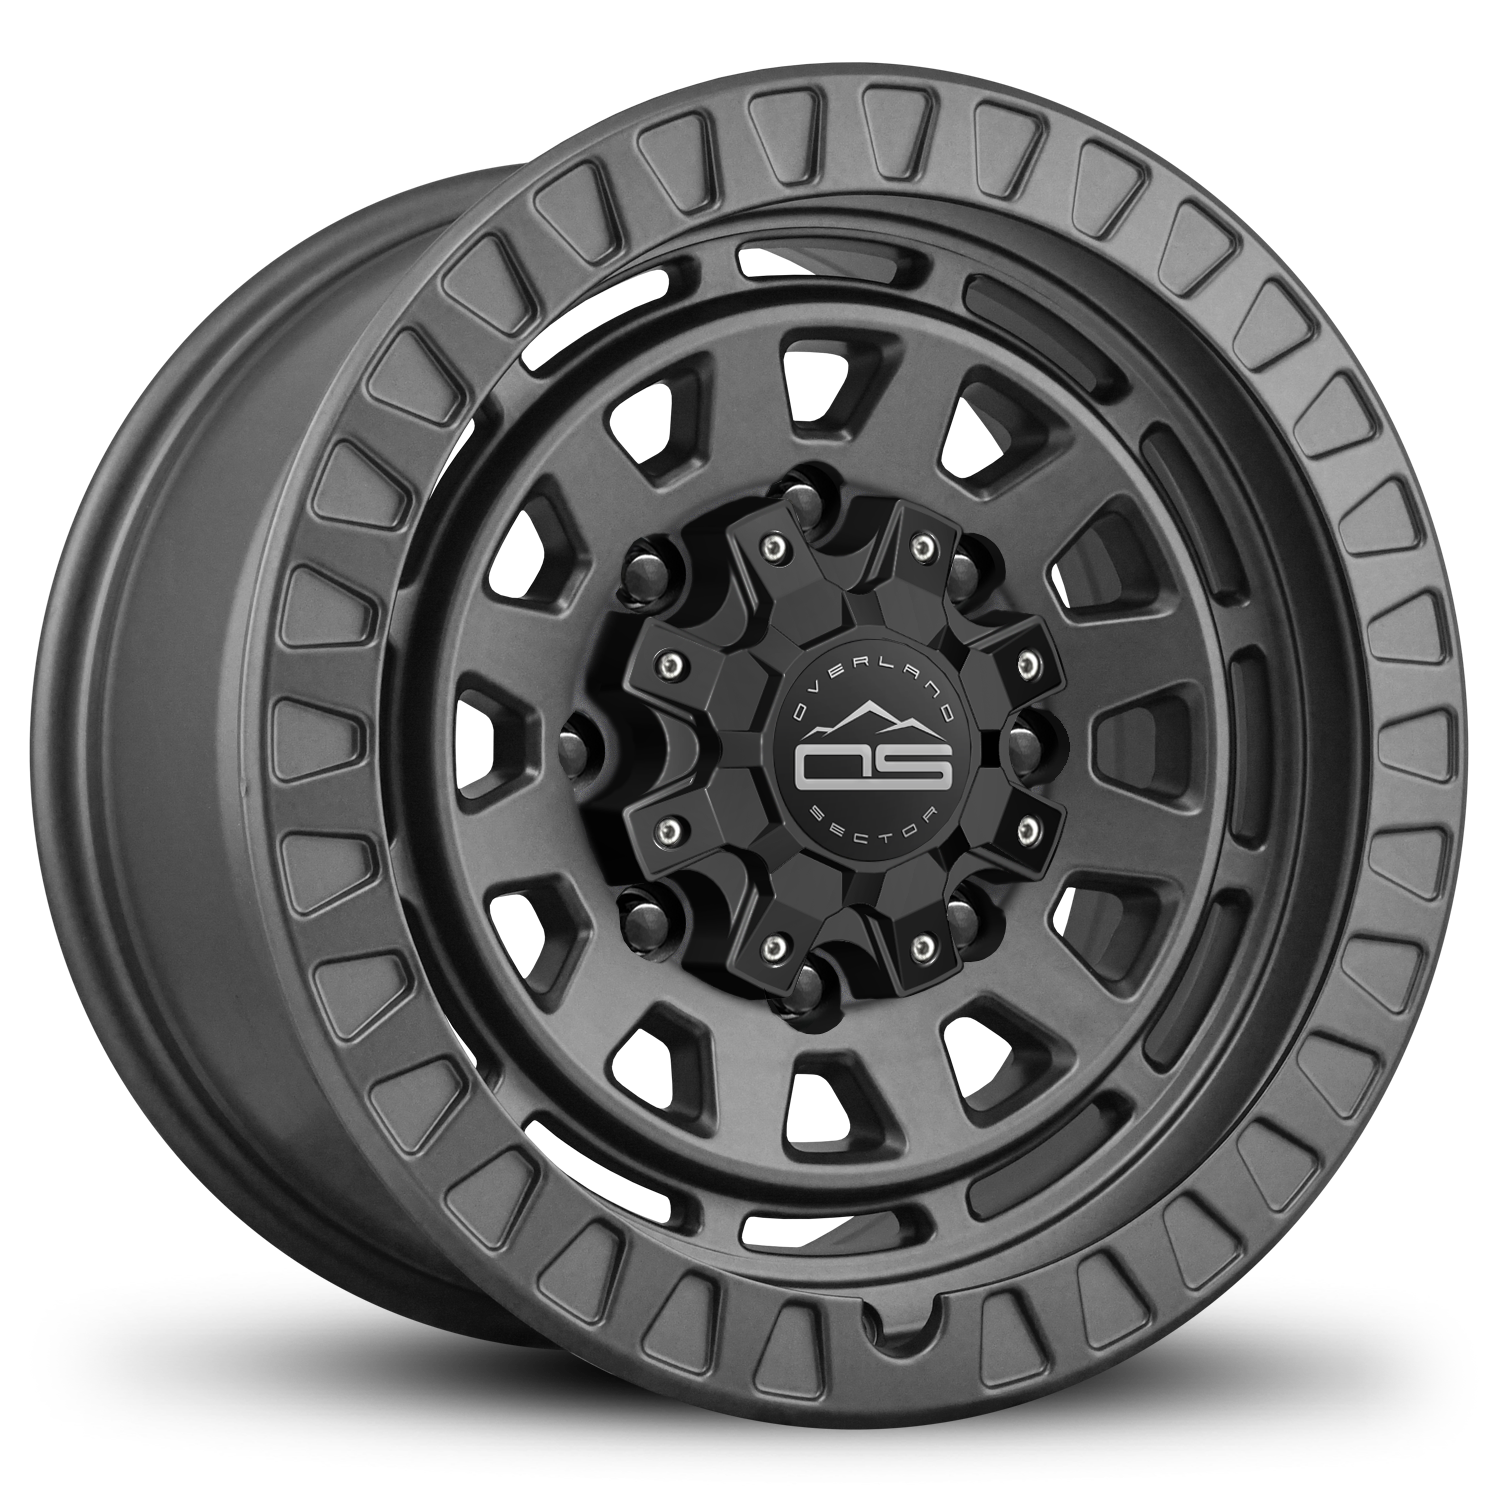 HD Off-Road Overland Sector Adventure Outdoor Life Style Wheel Rims for Ford F-250 & 350 Super Duty, Chevy Chevrolet Silverado 2500 & 3500 HD, GMC Sierra 2500 & 3500 HD, Dodge RAM 2500 in 17x9.0 Inch All Satin Gray 6x135 & 6x139.7